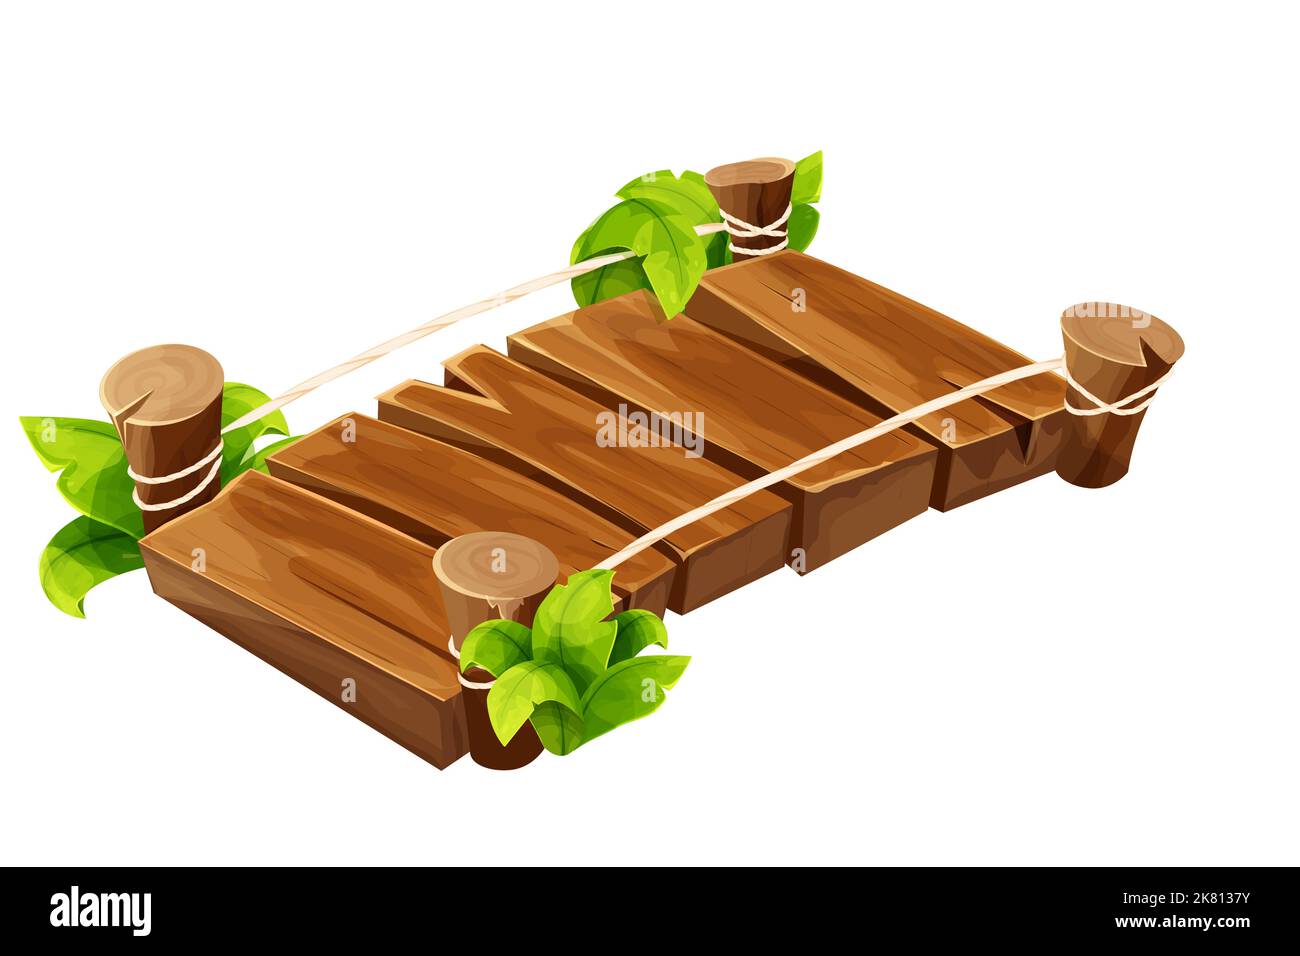 Wooden bridge old with rope in isometric view in cartoon style isolated on white background. Detailed, textured game element. Vector illustration Stock Vector